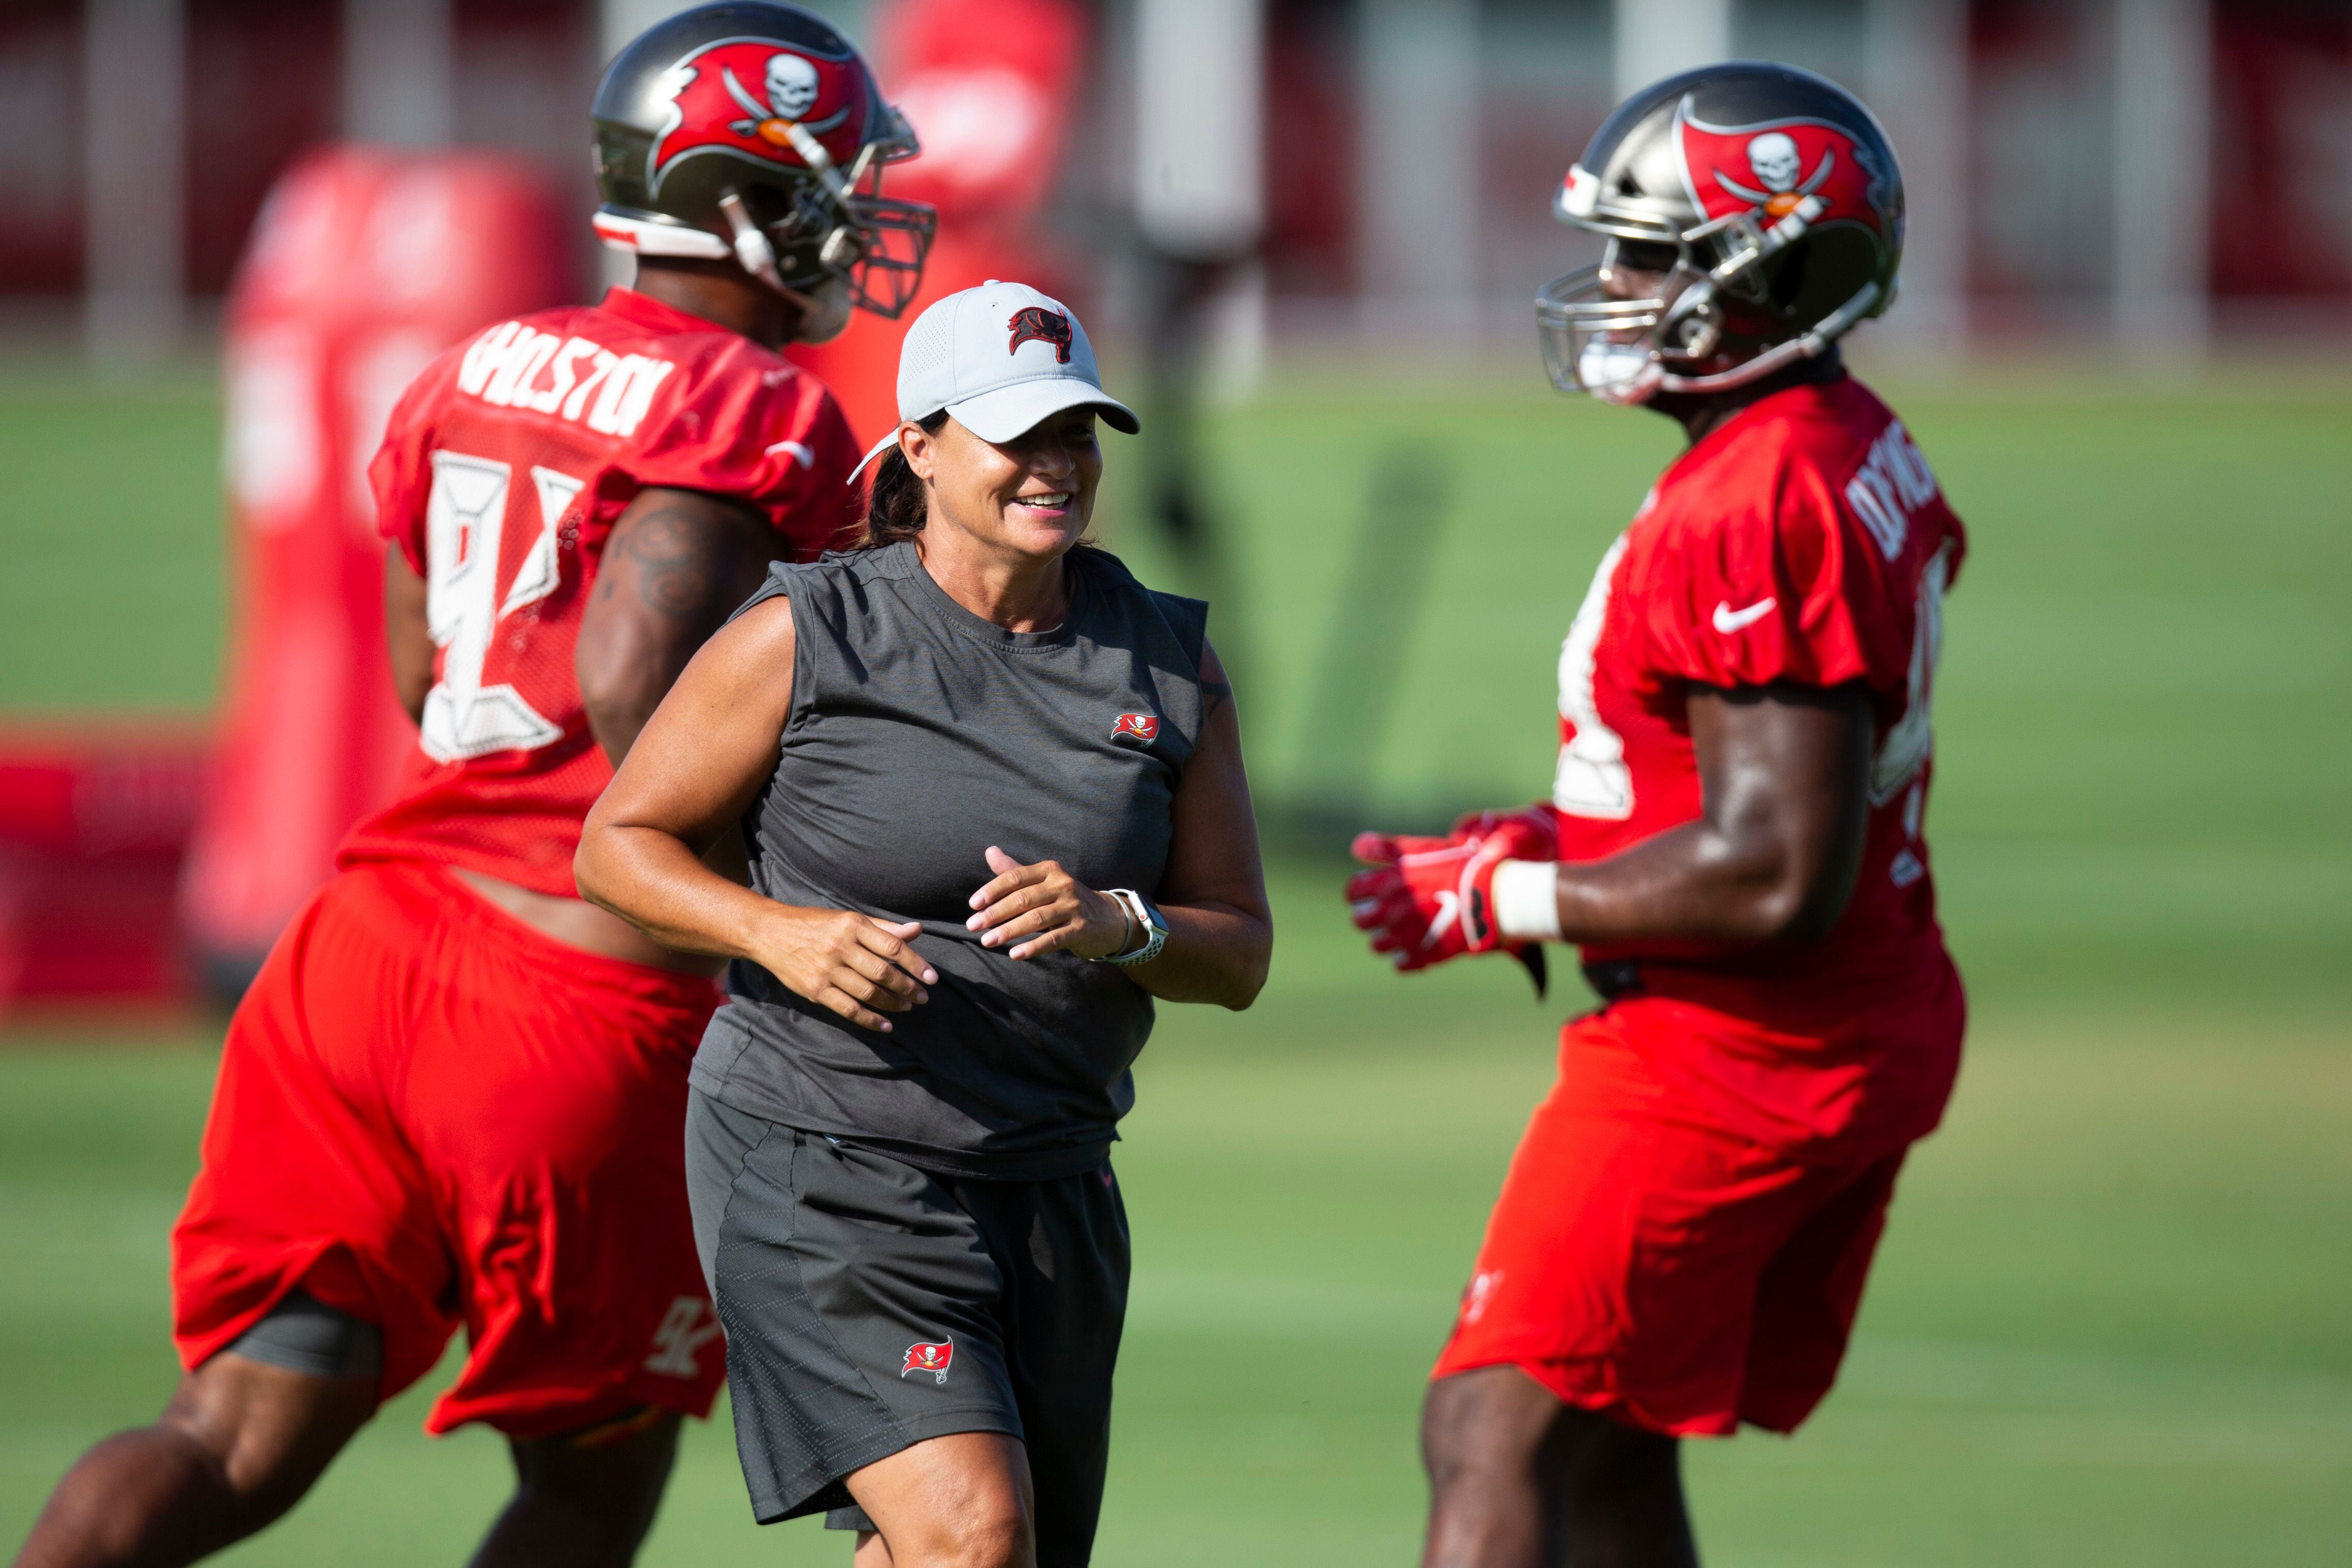 Tampa Bay Buccaneers are 1st NFL team to hire 2 full-time female